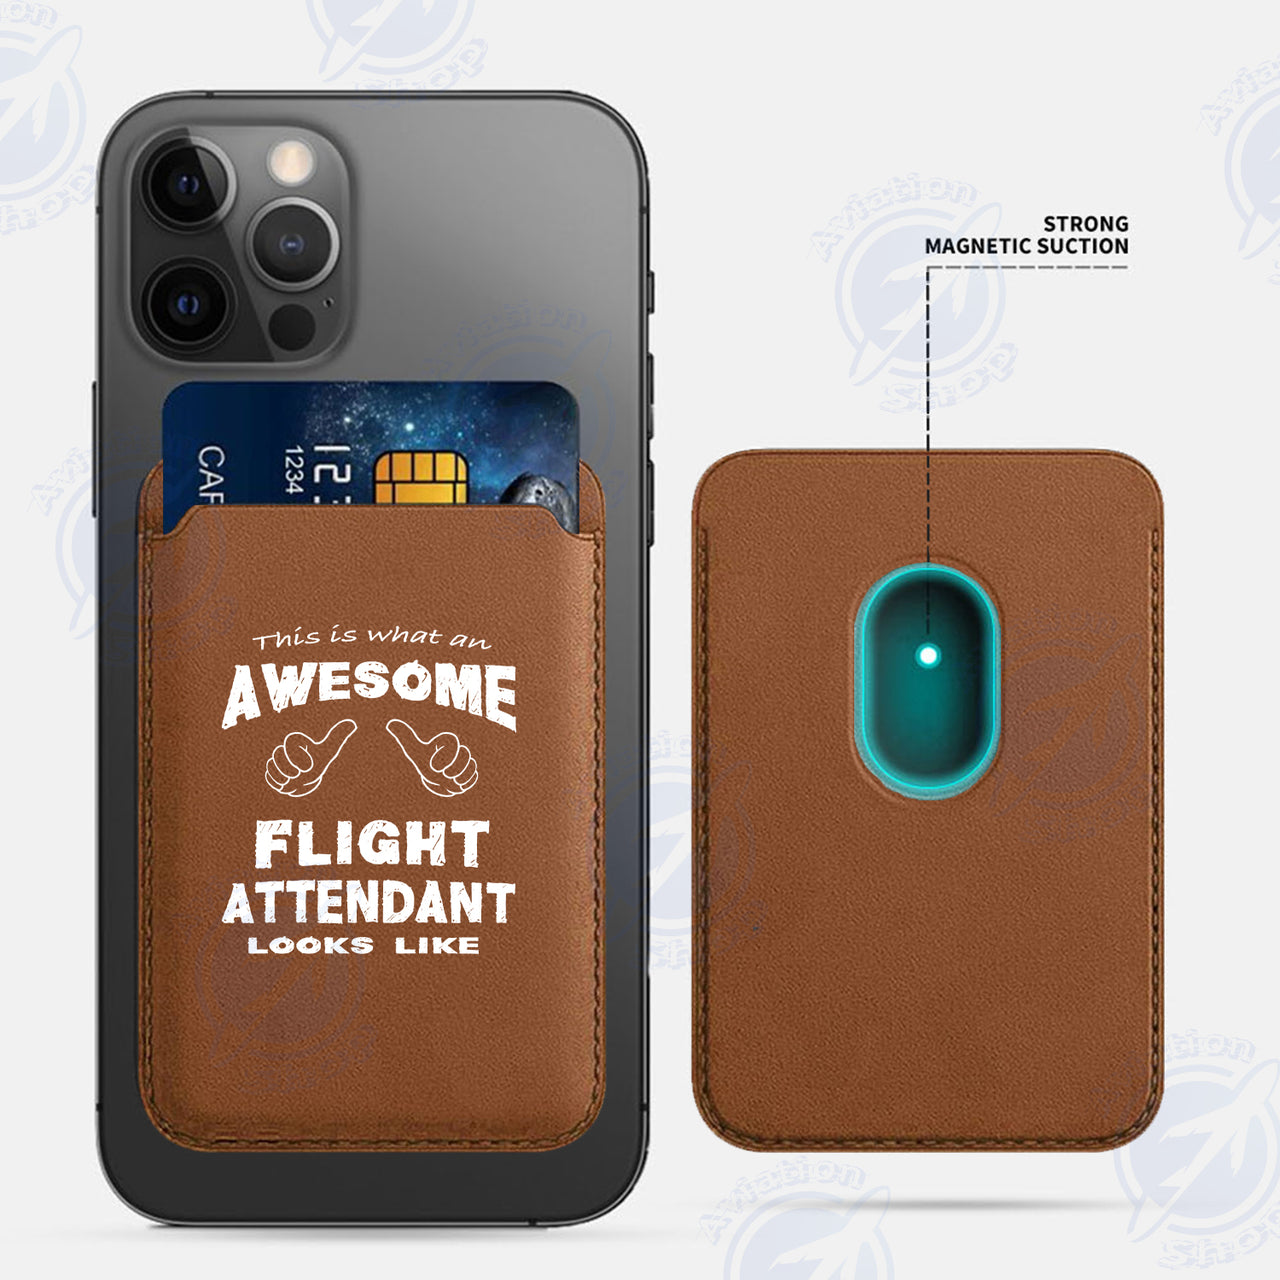 Flight Attendant iPhone Cases Magnetic Card Wallet